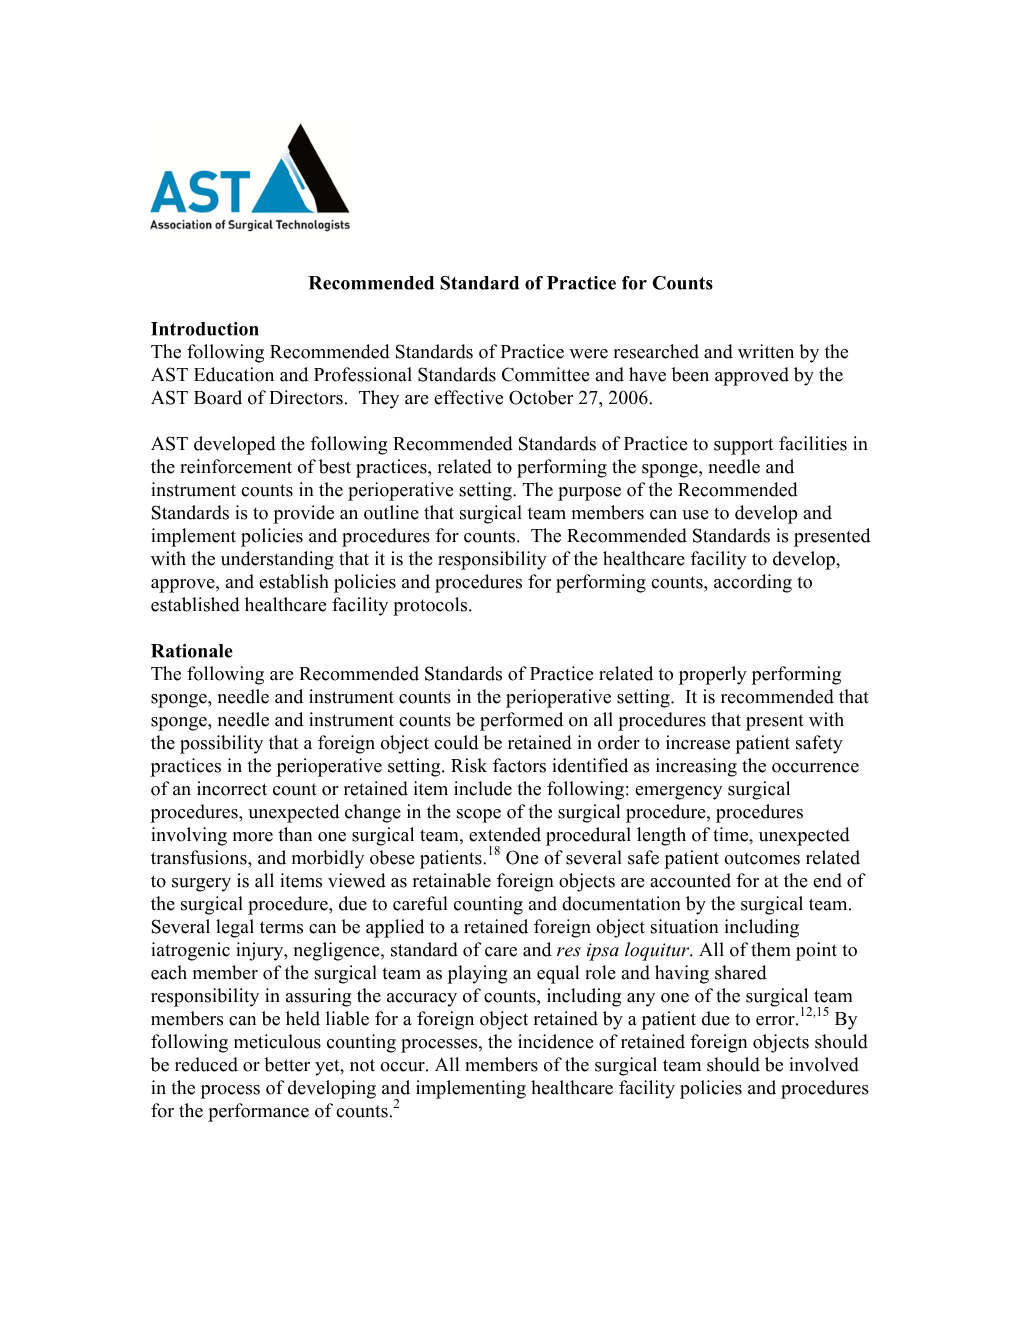 AST Guidelines for Counts